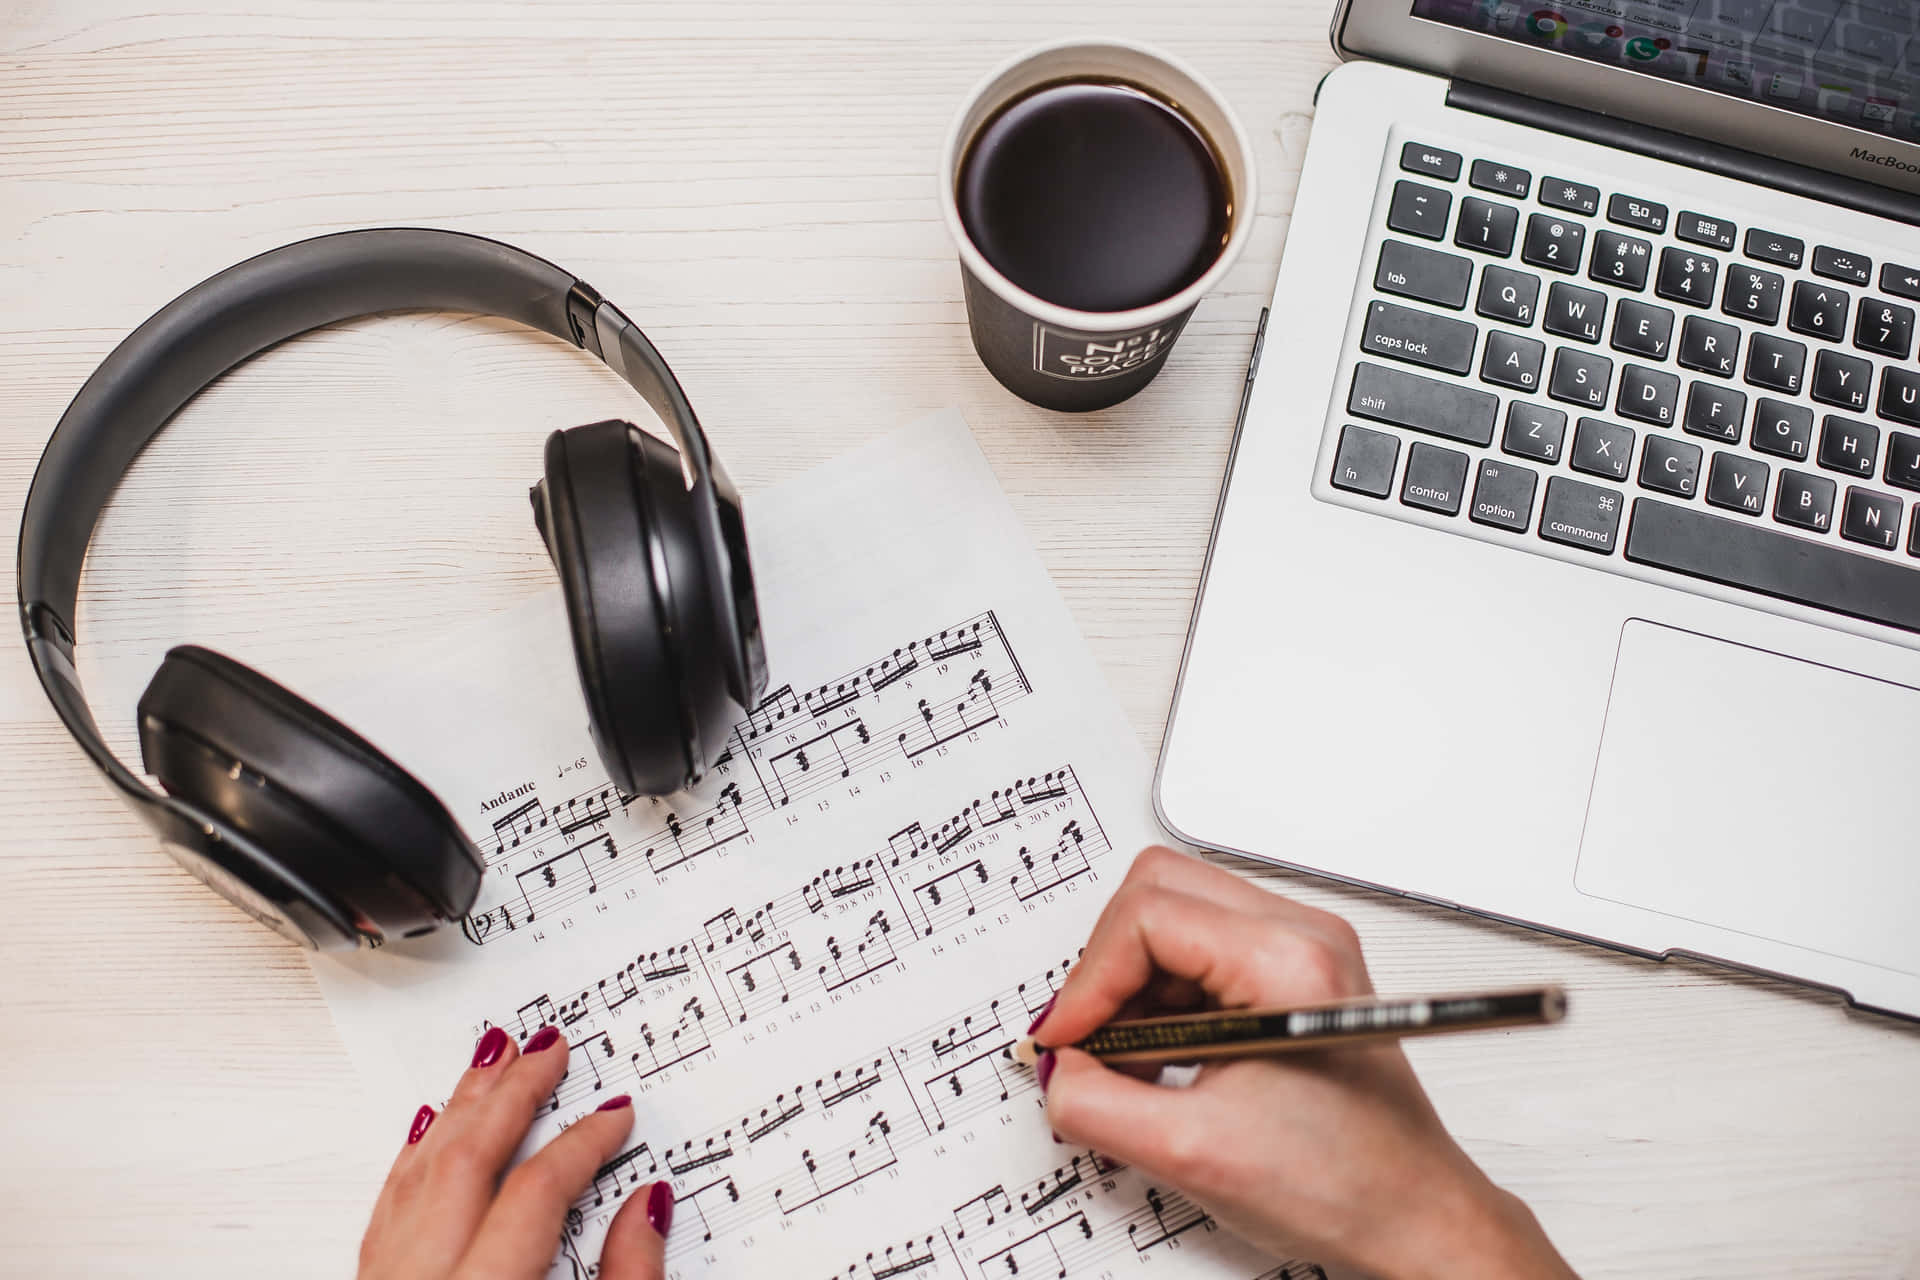 A laptop and headphones creating musical harmony Wallpaper